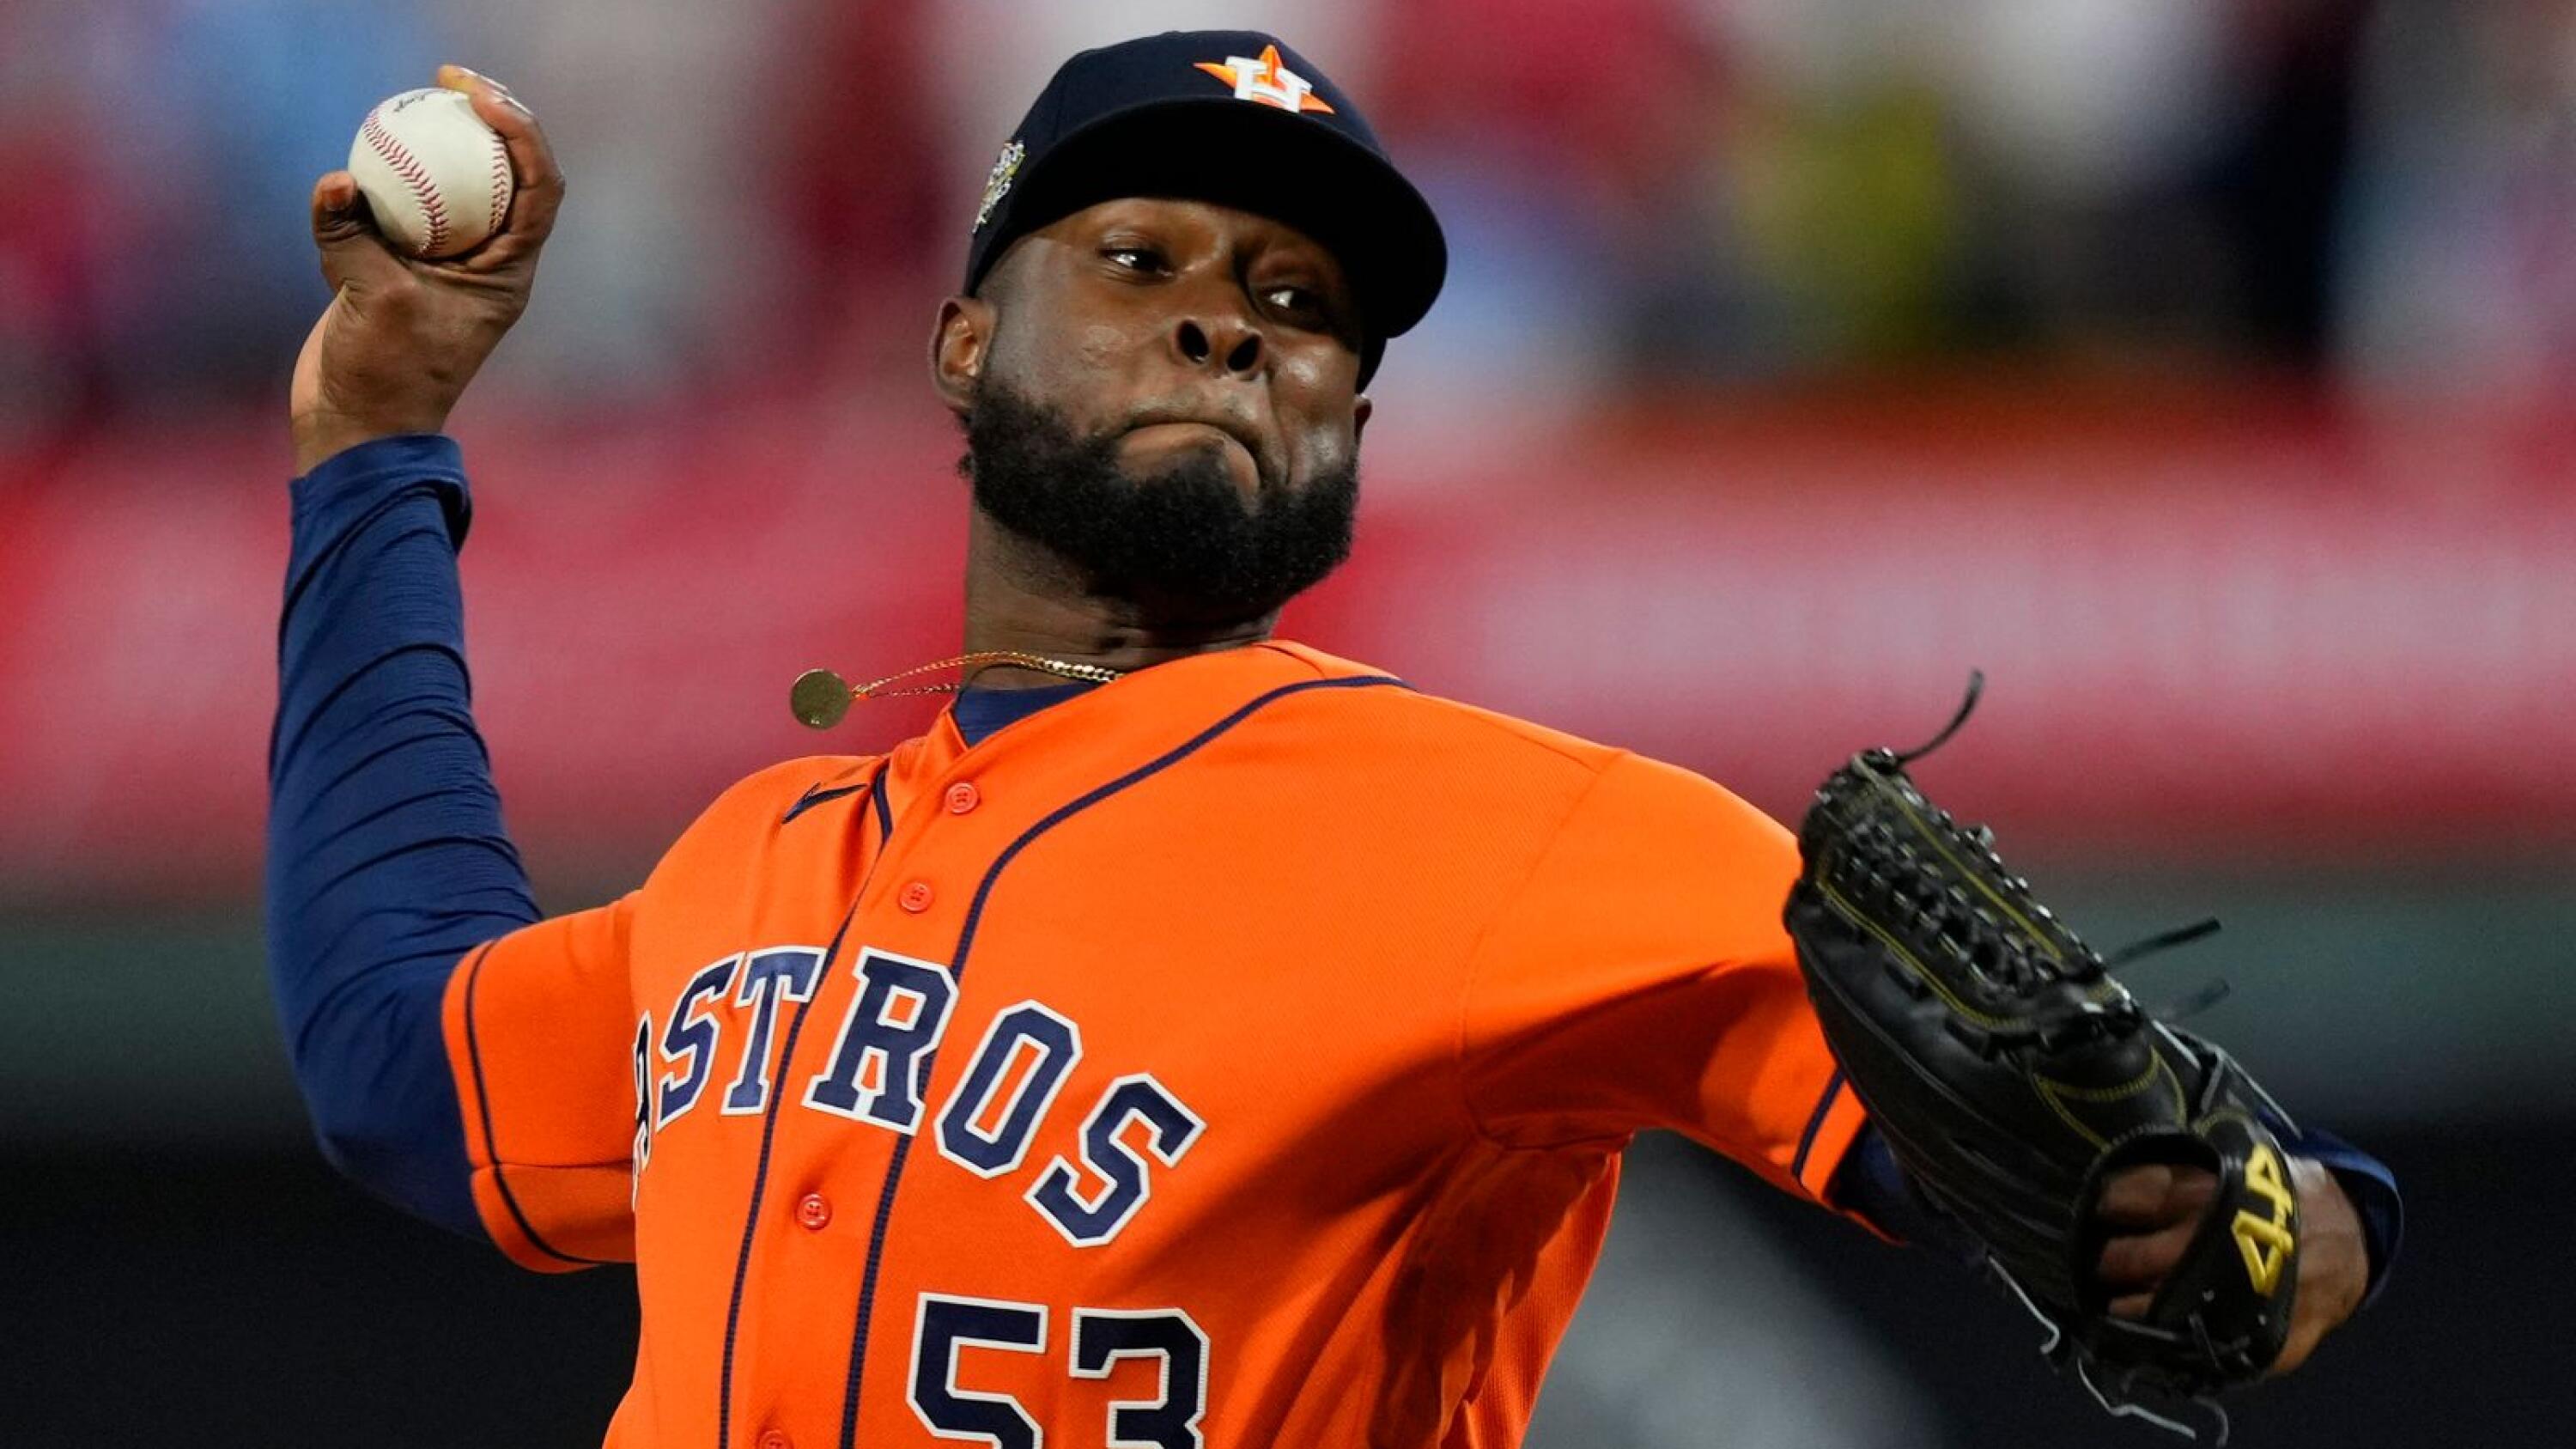 Combined no-hitter helps Astros win 5-0 and even World Series